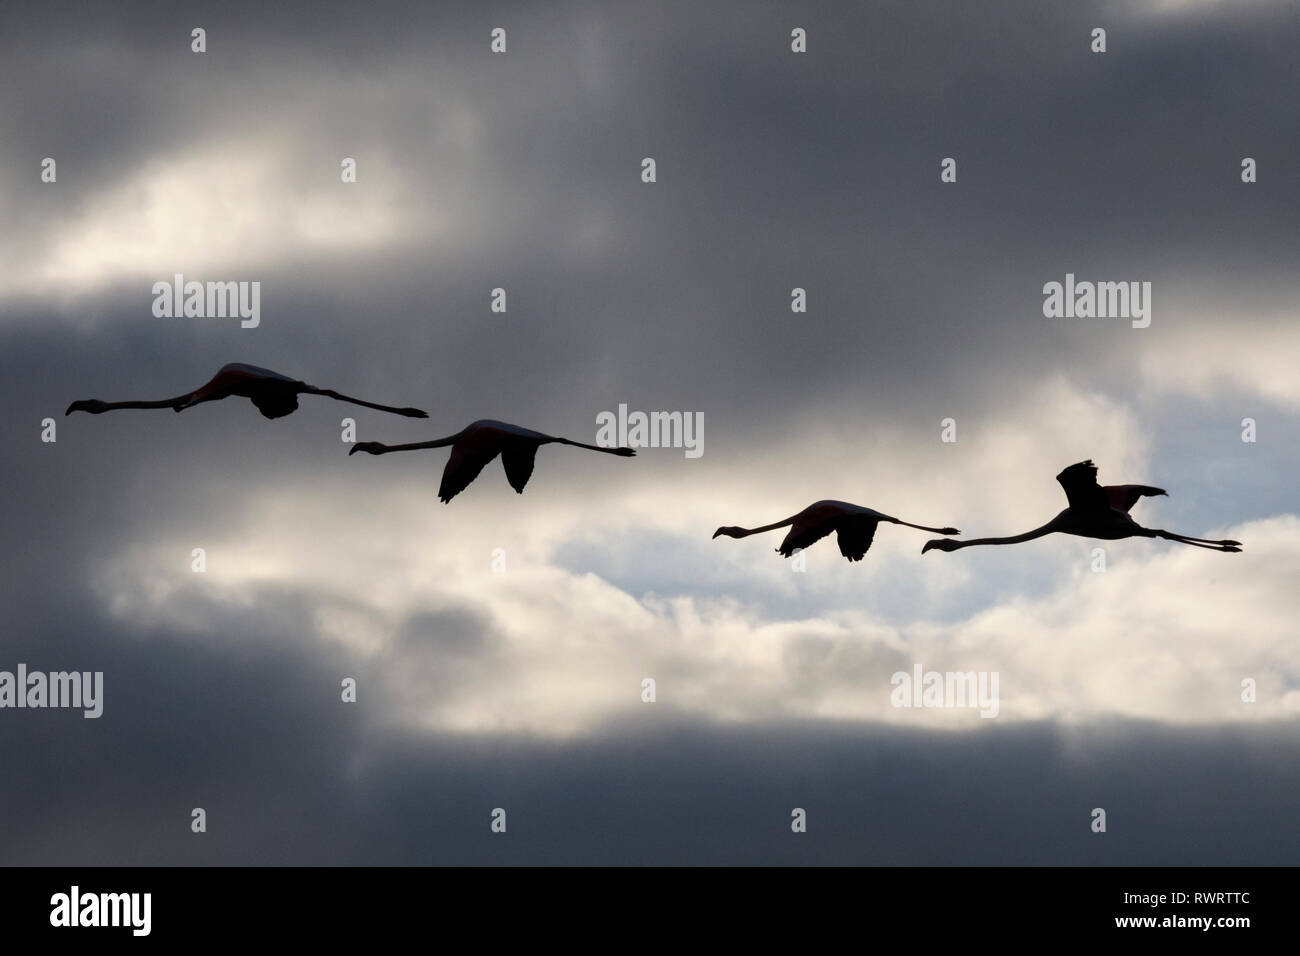 Silhouettes of a  flock of flamingos in flight Stock Photo